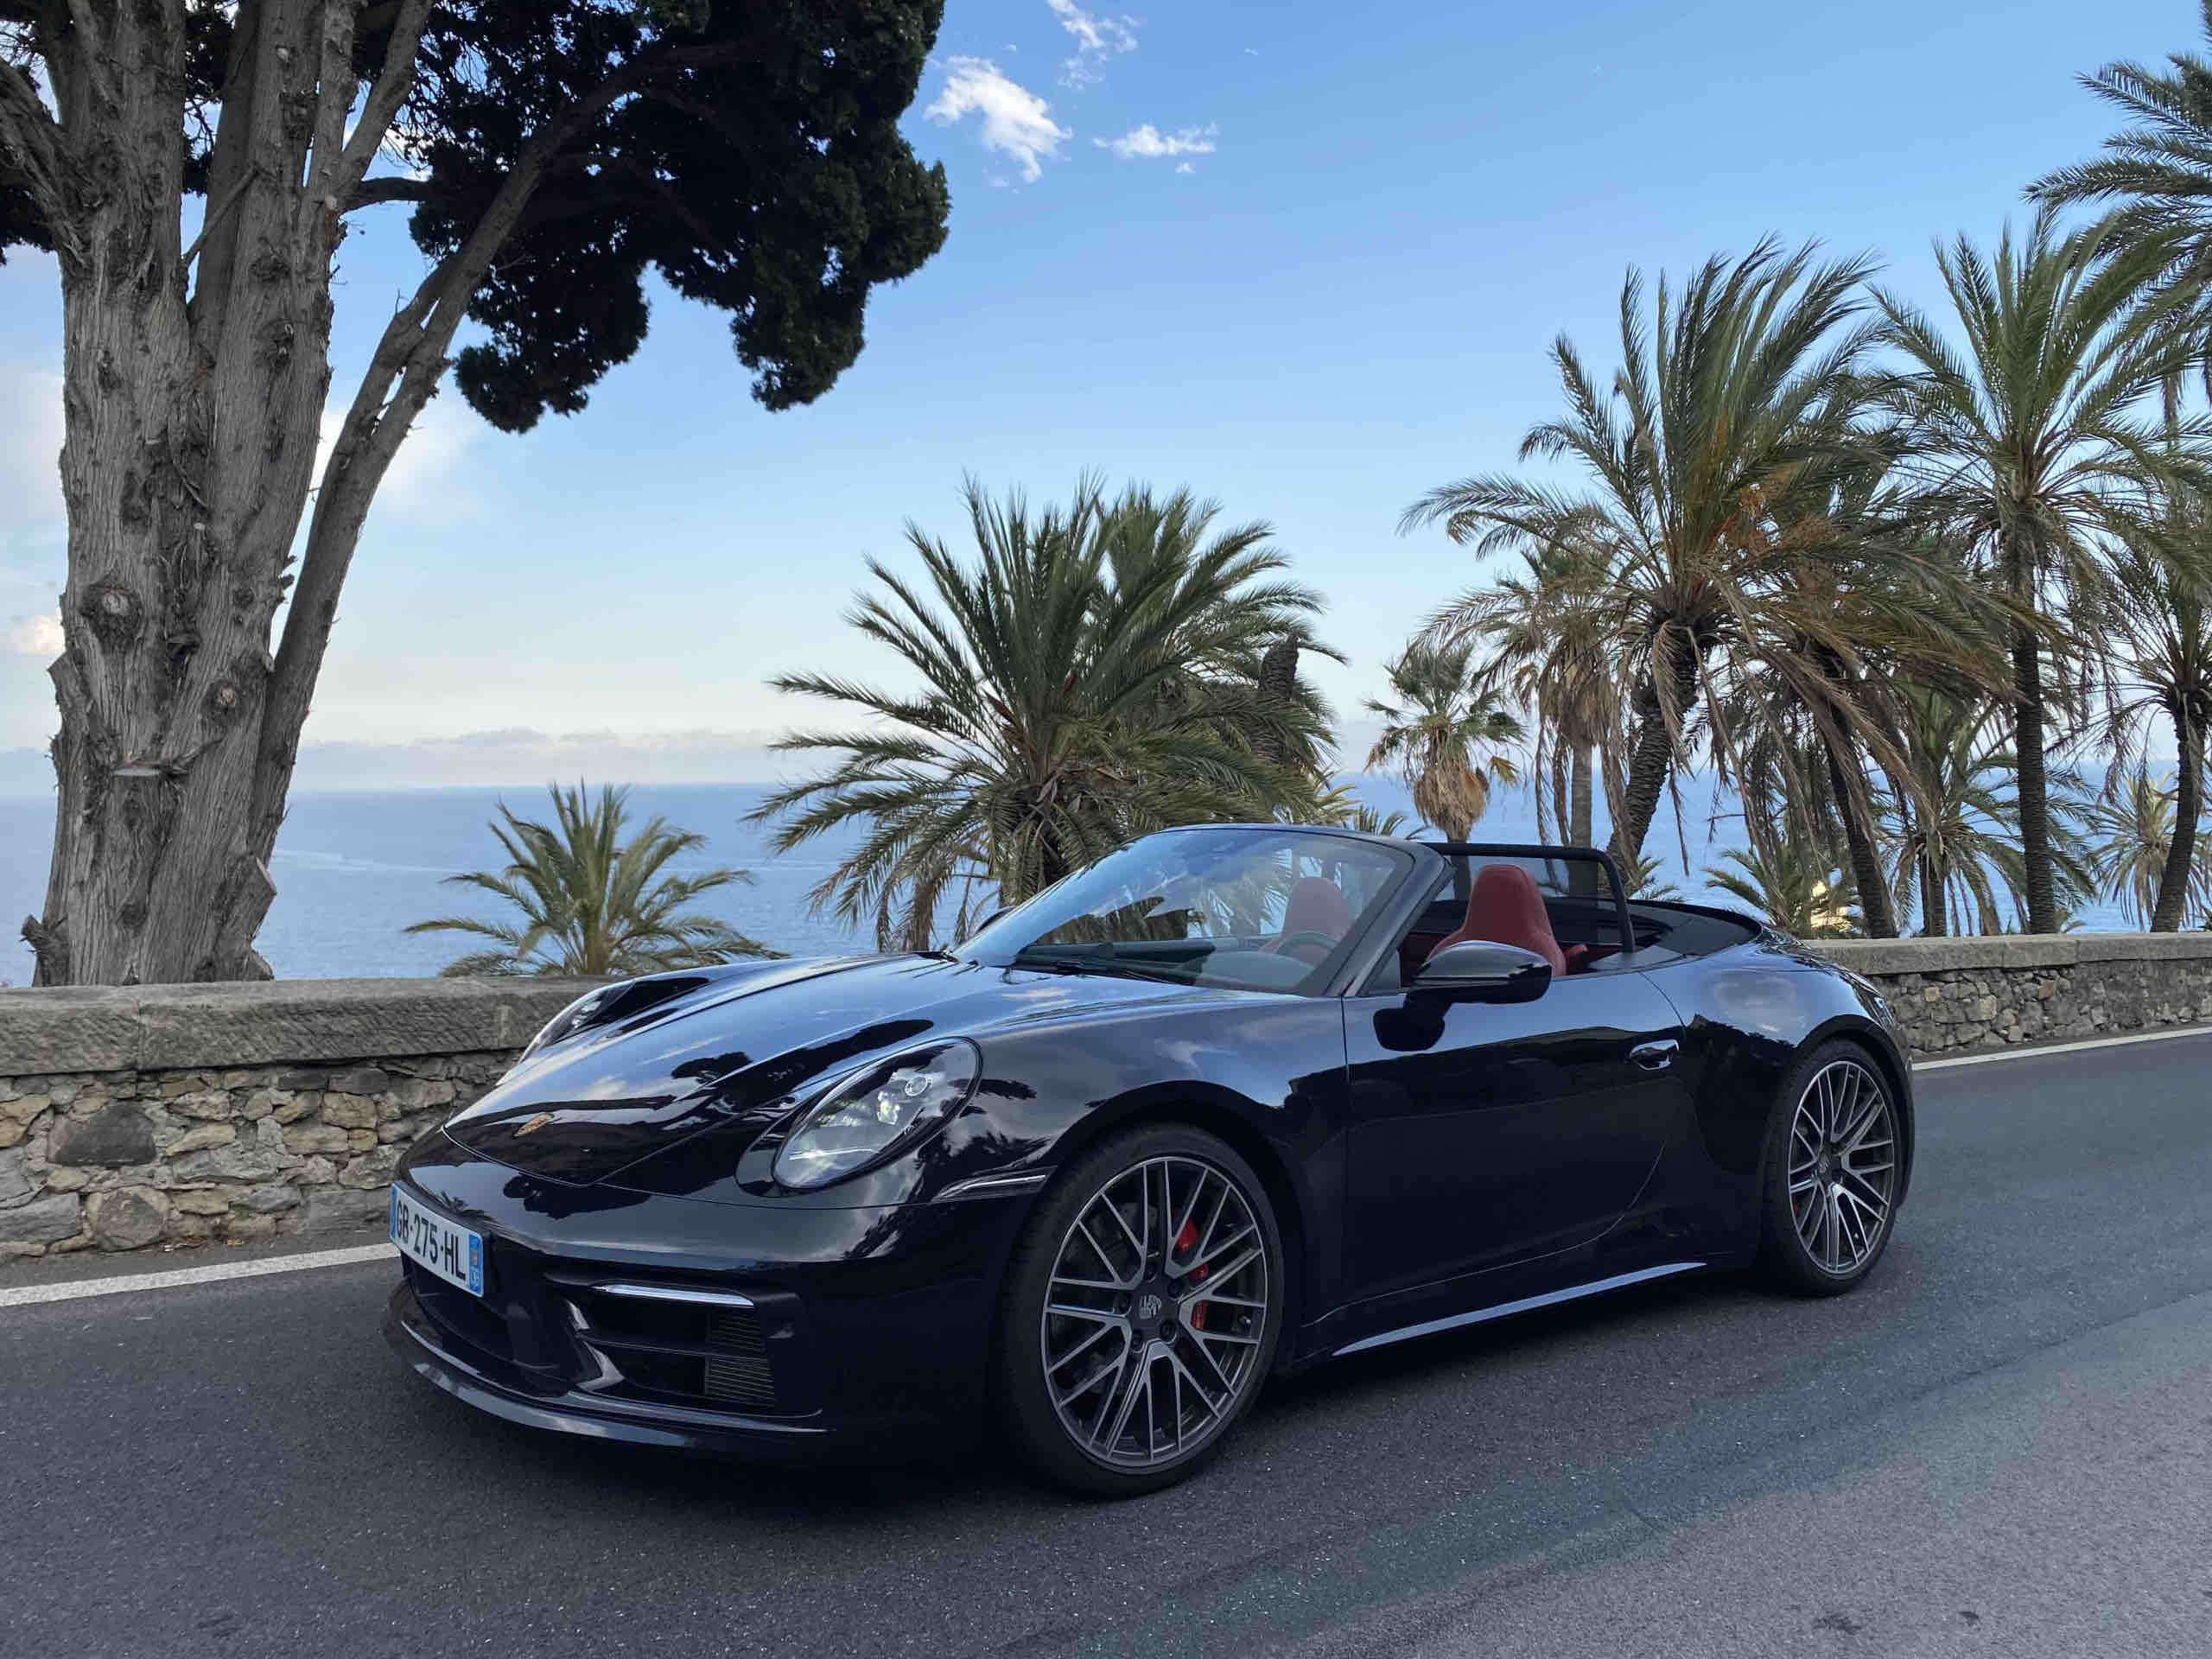 Book your luxury sports car hire in Monaco now